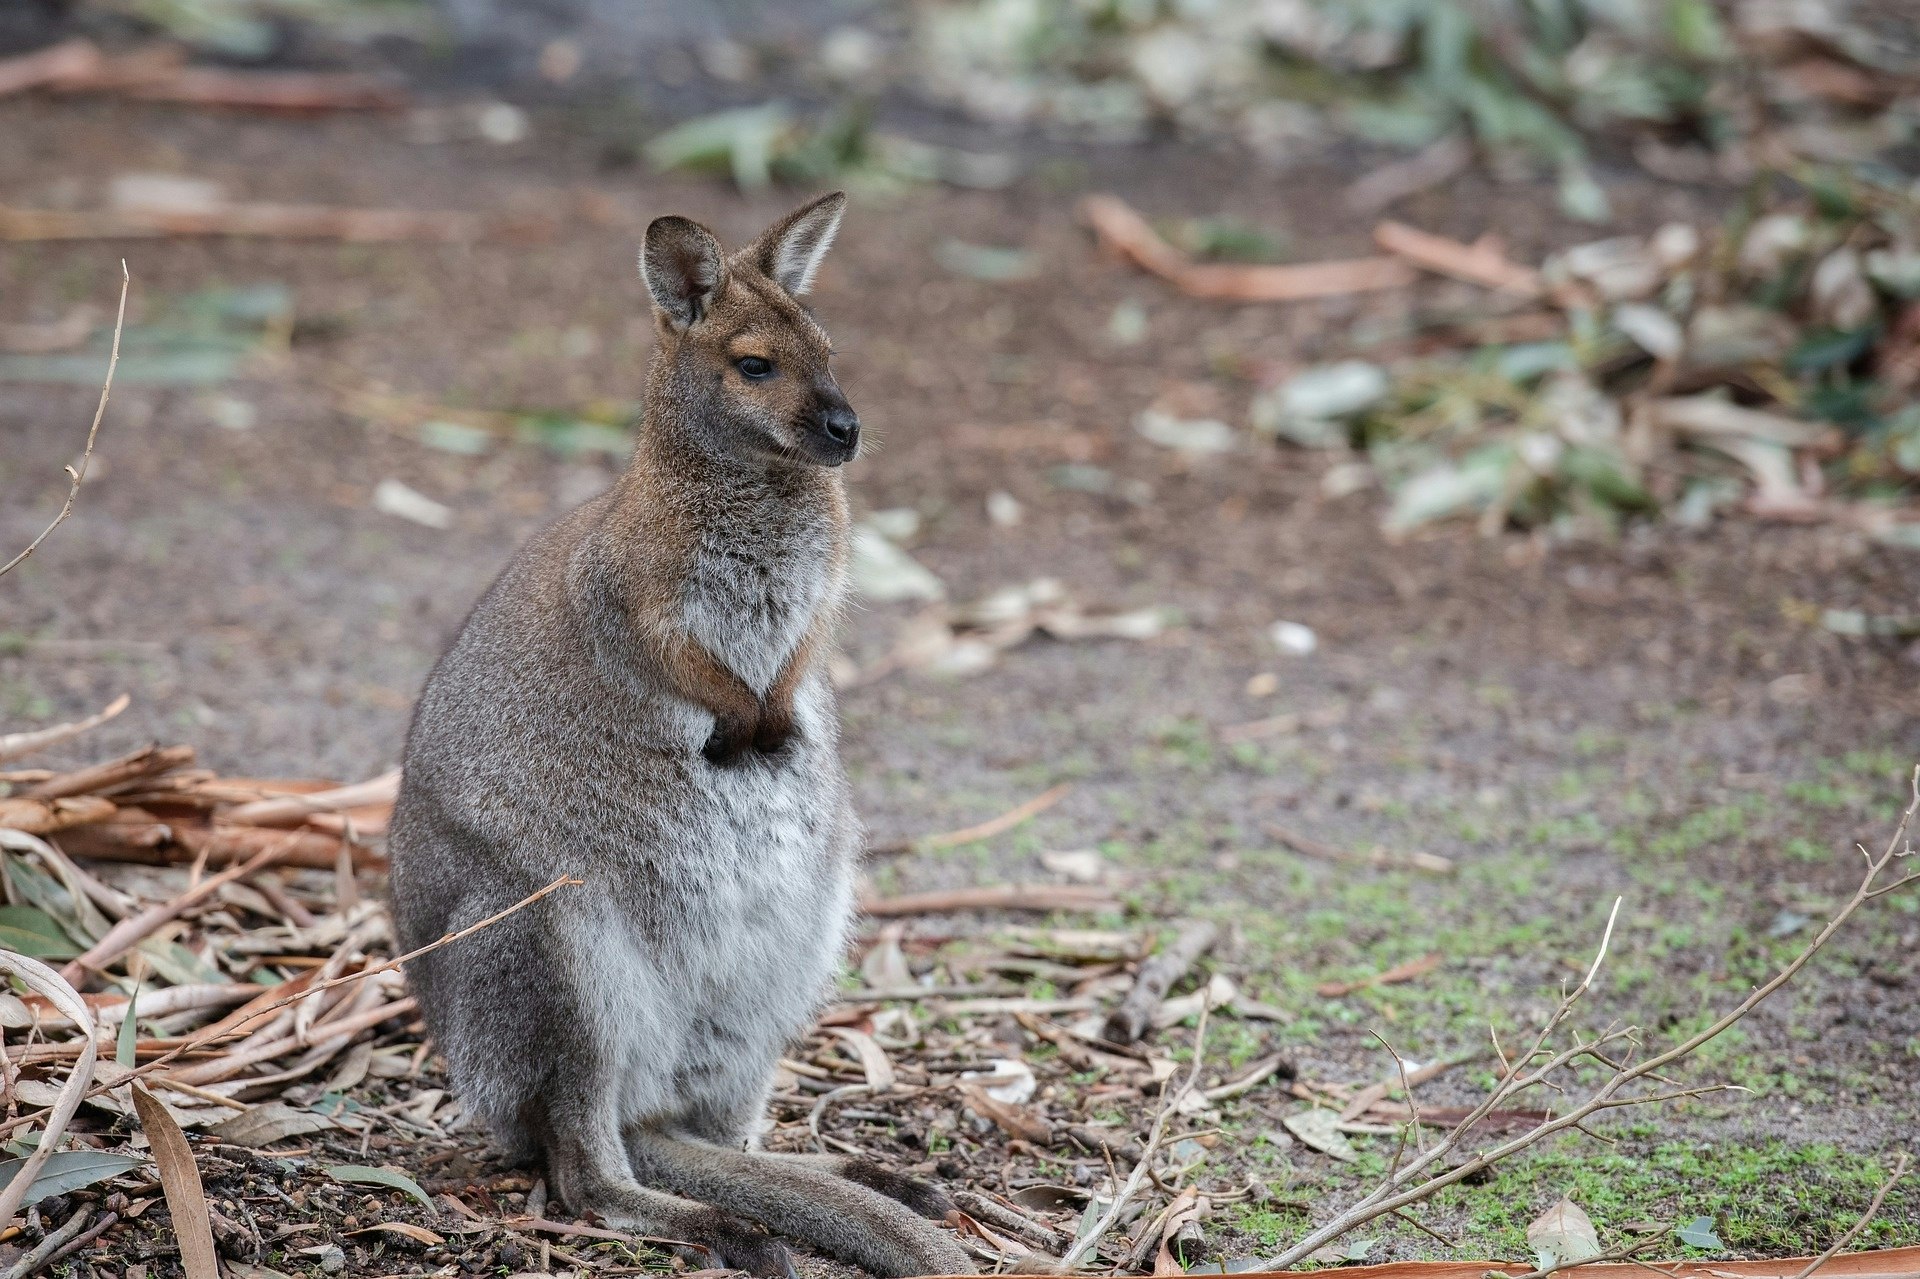 a close-up image of a small kangaroo-looking gray creature that is a wallaby